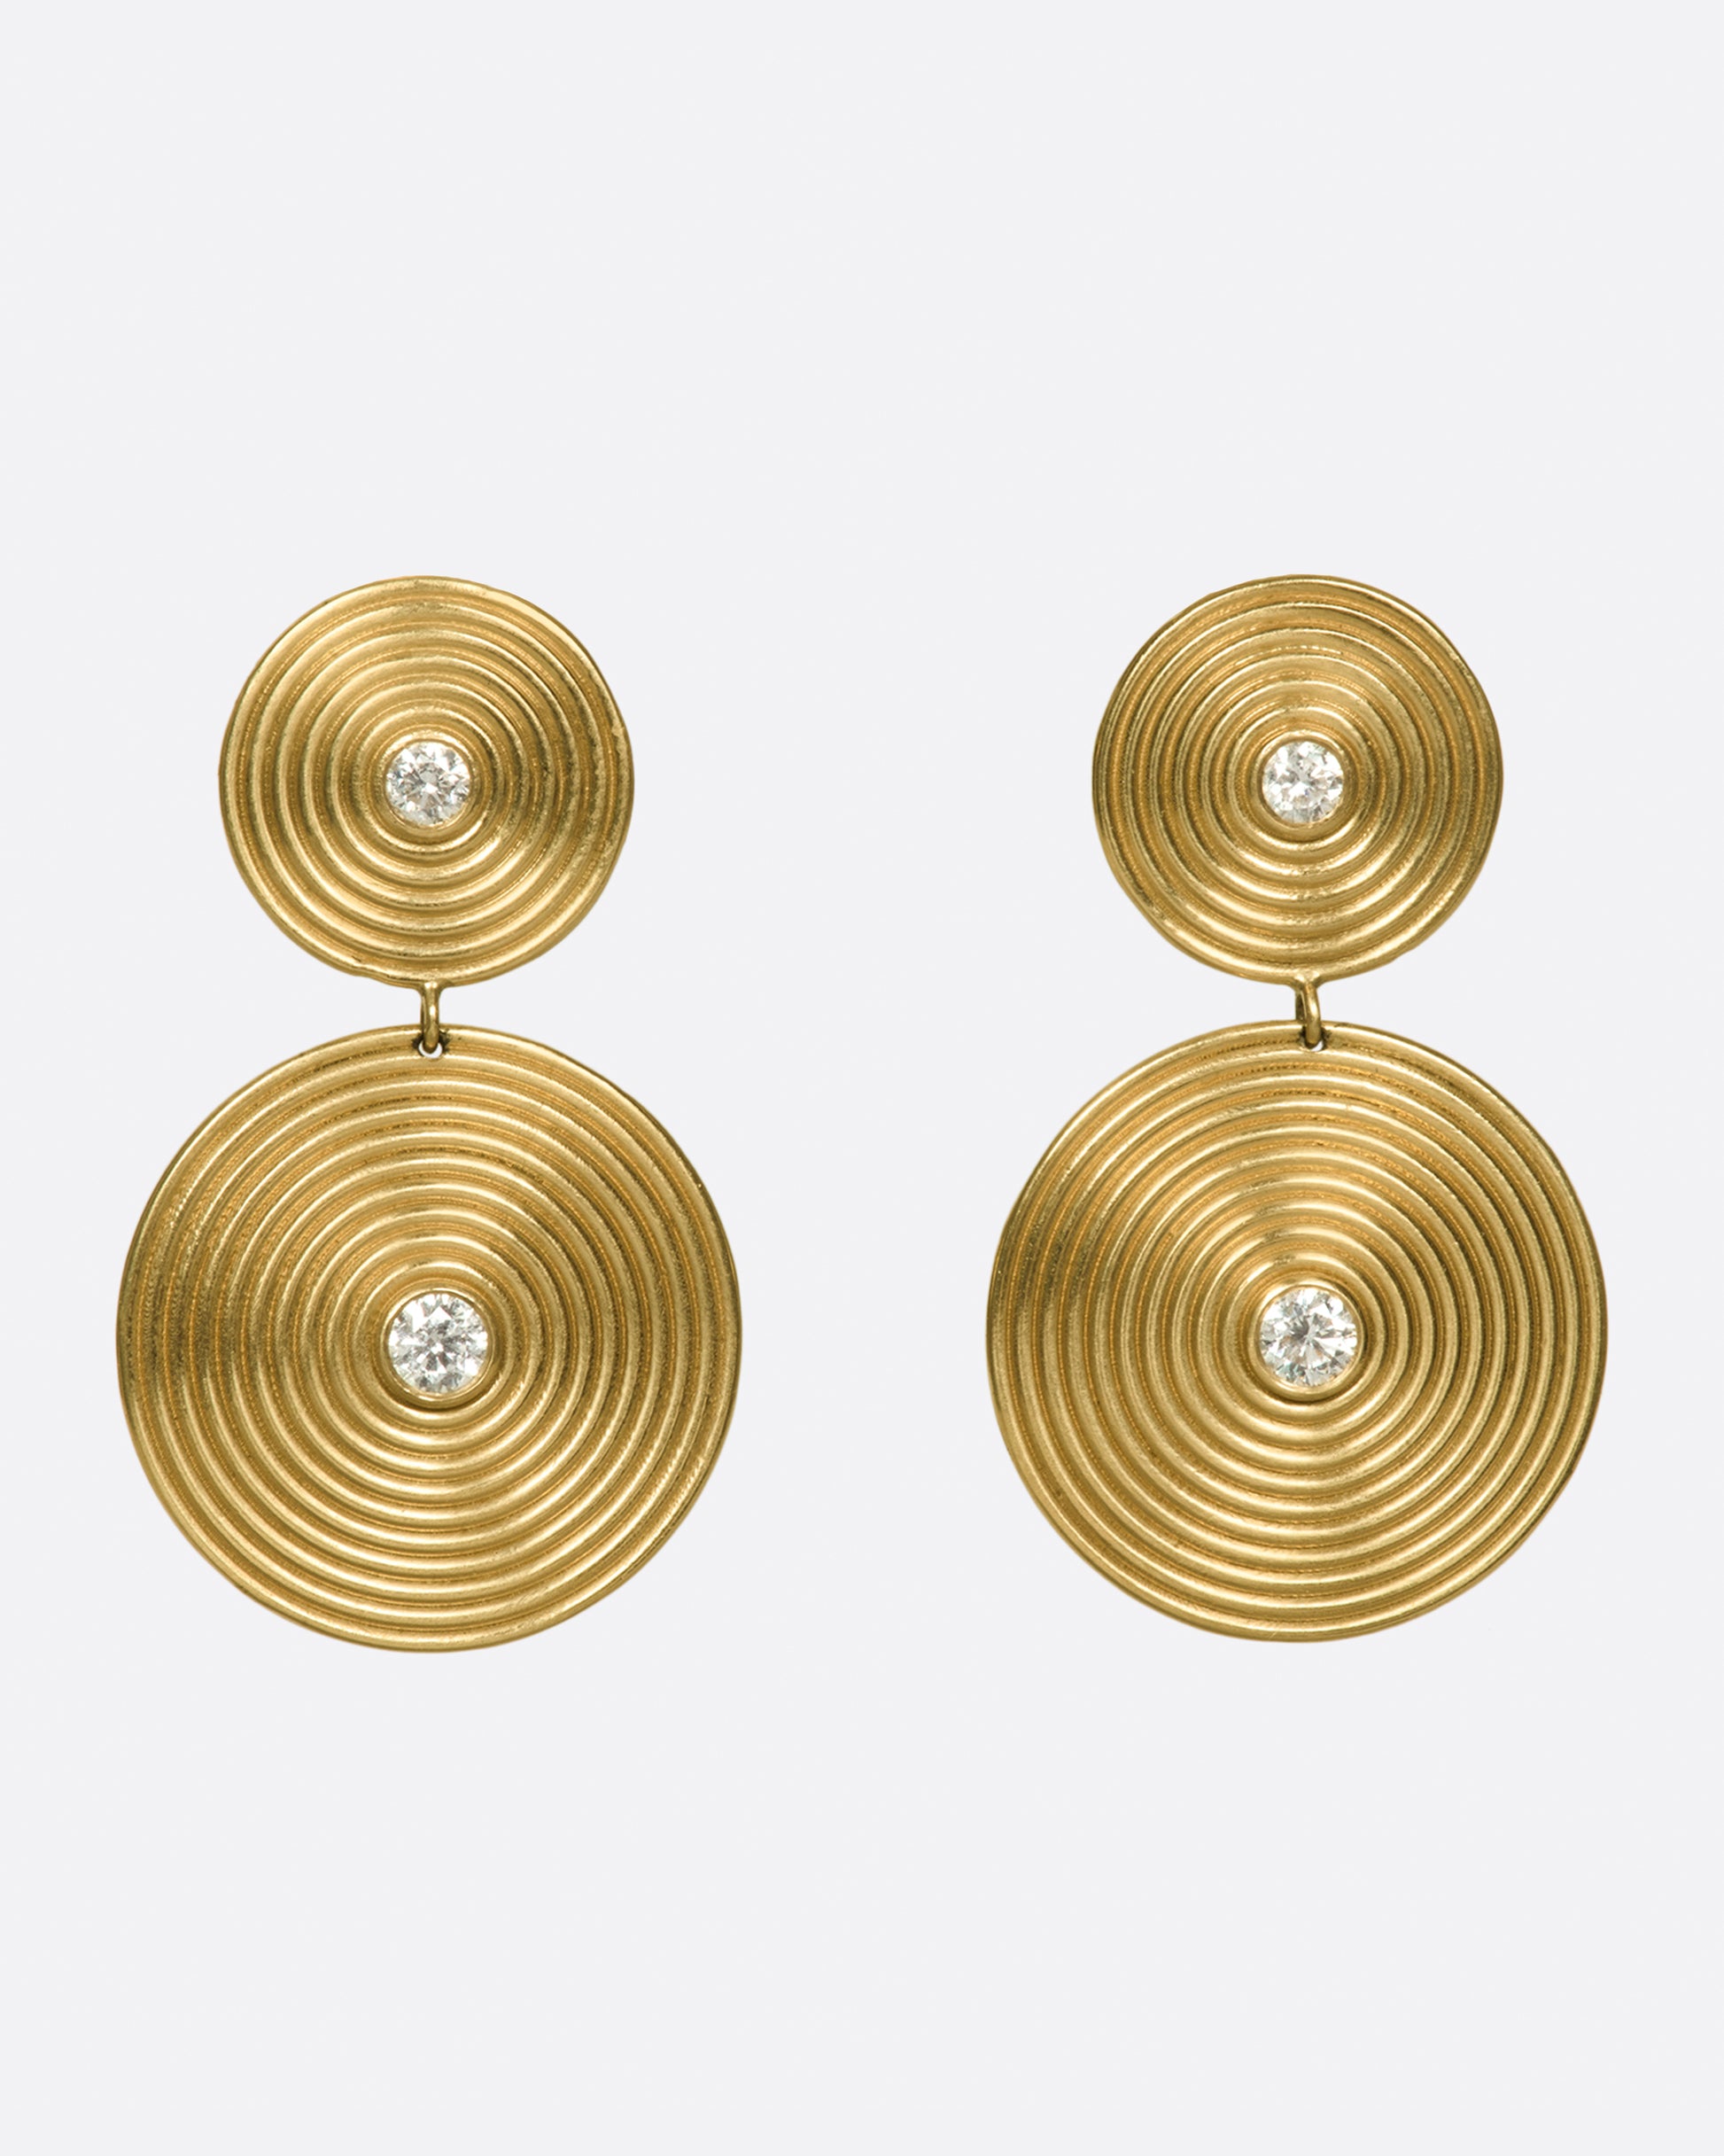 14k gold disc drops, each punctuated with two white diamonds. The concentric circles are elegant symbols of growth and change.